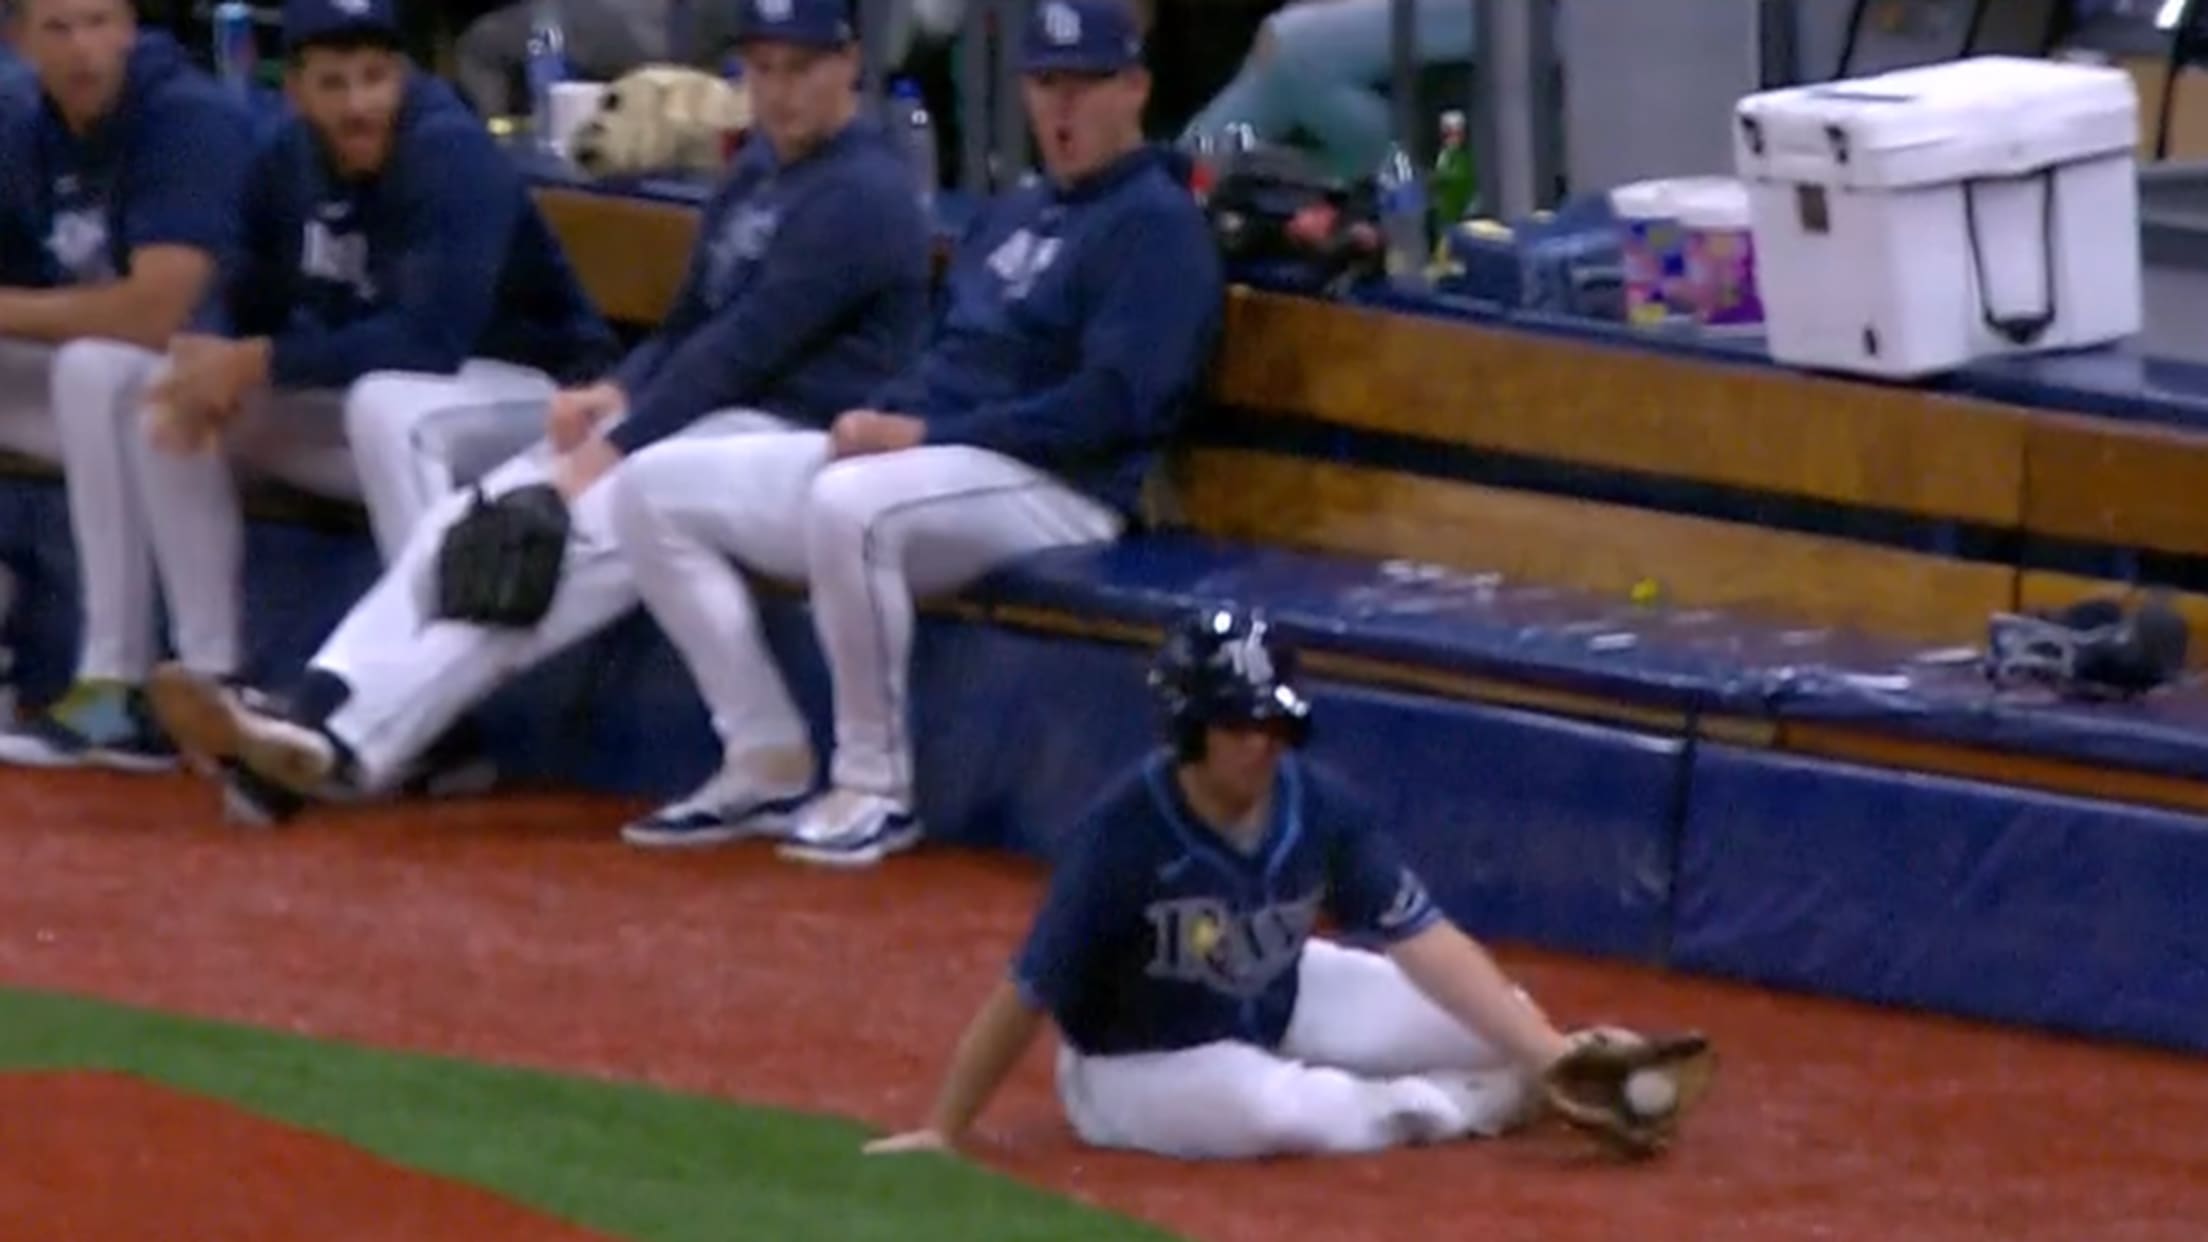 A Rays ballboy snags a grounder from the ground